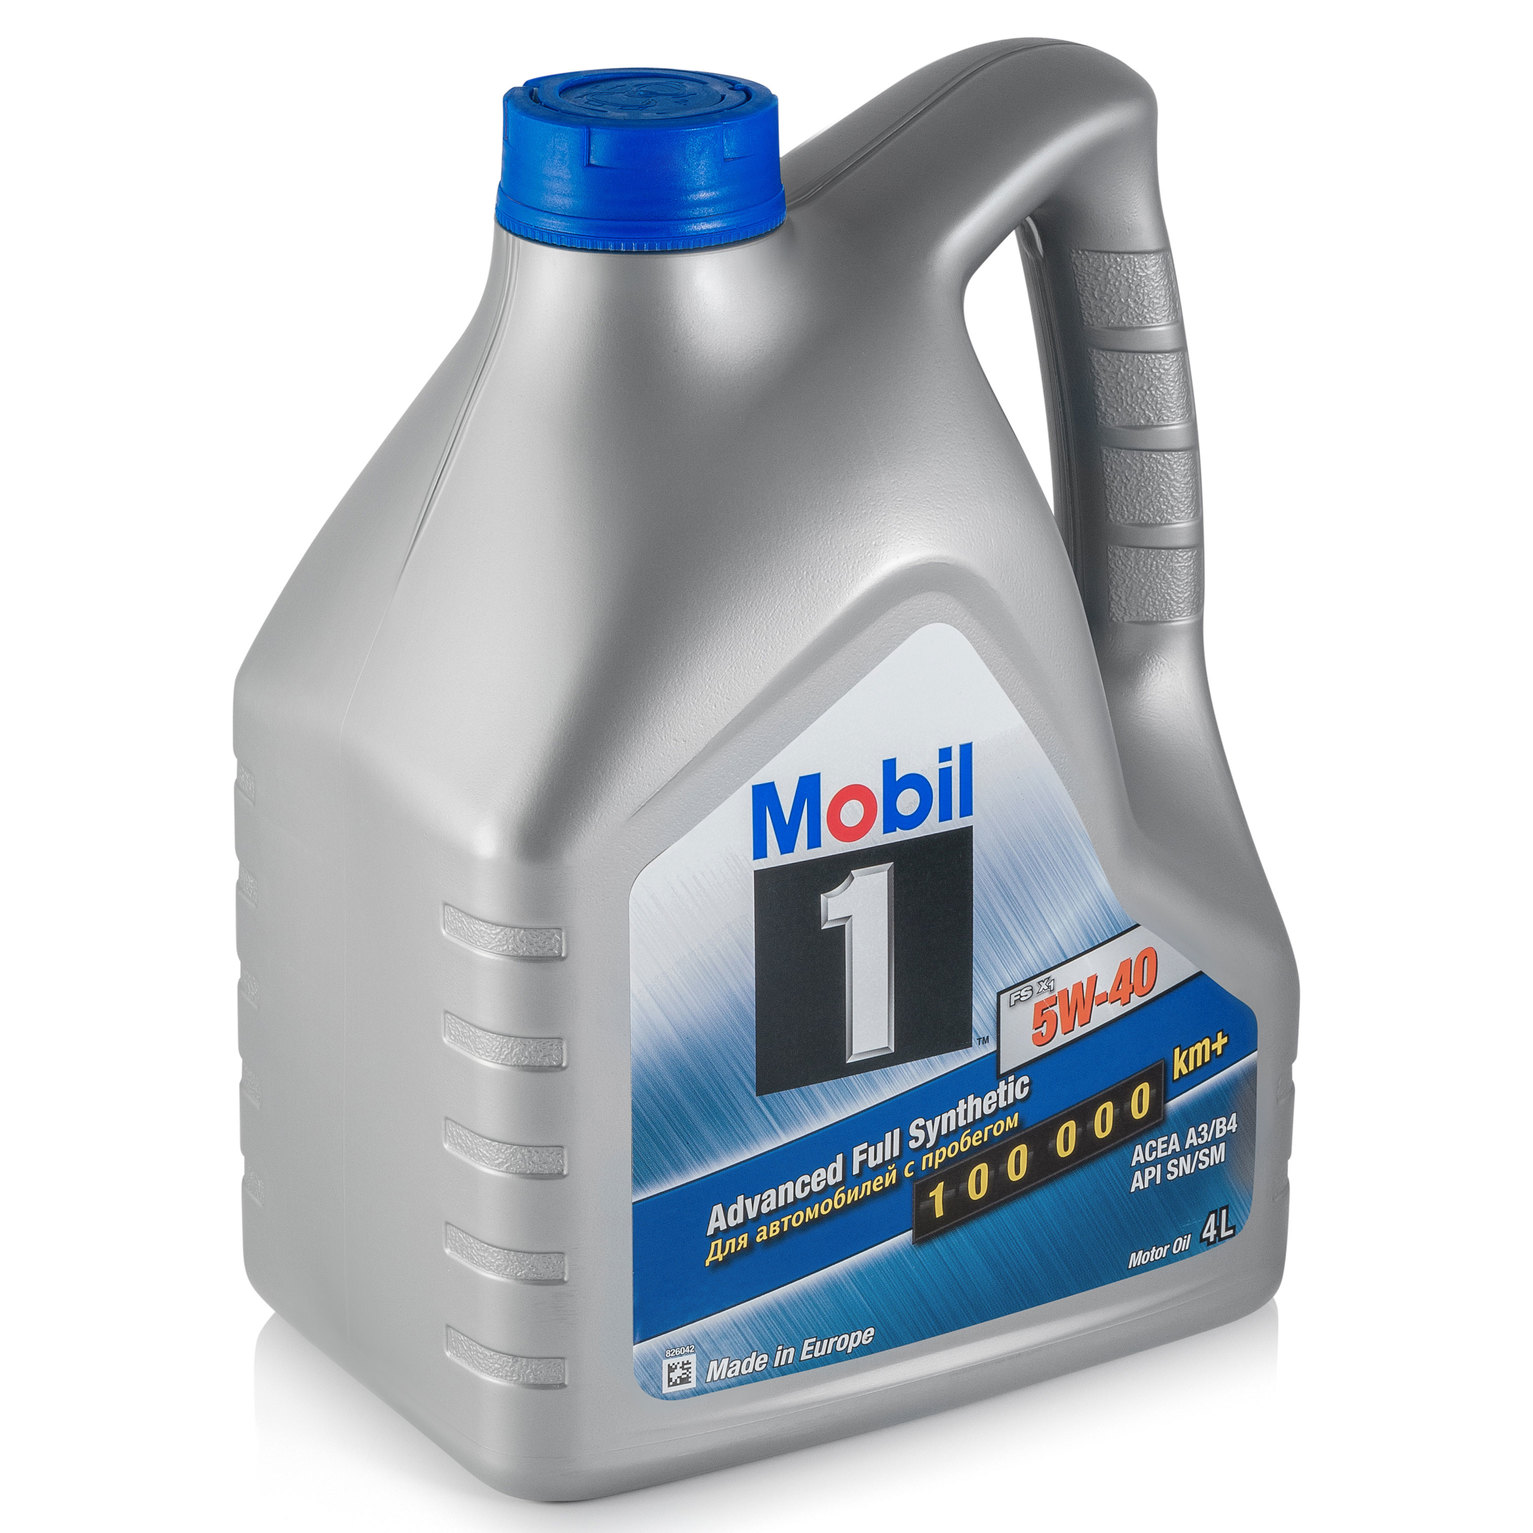 Engine oil Mobil 1 Full Synthetic 5W-40, 4L Mobil 153265